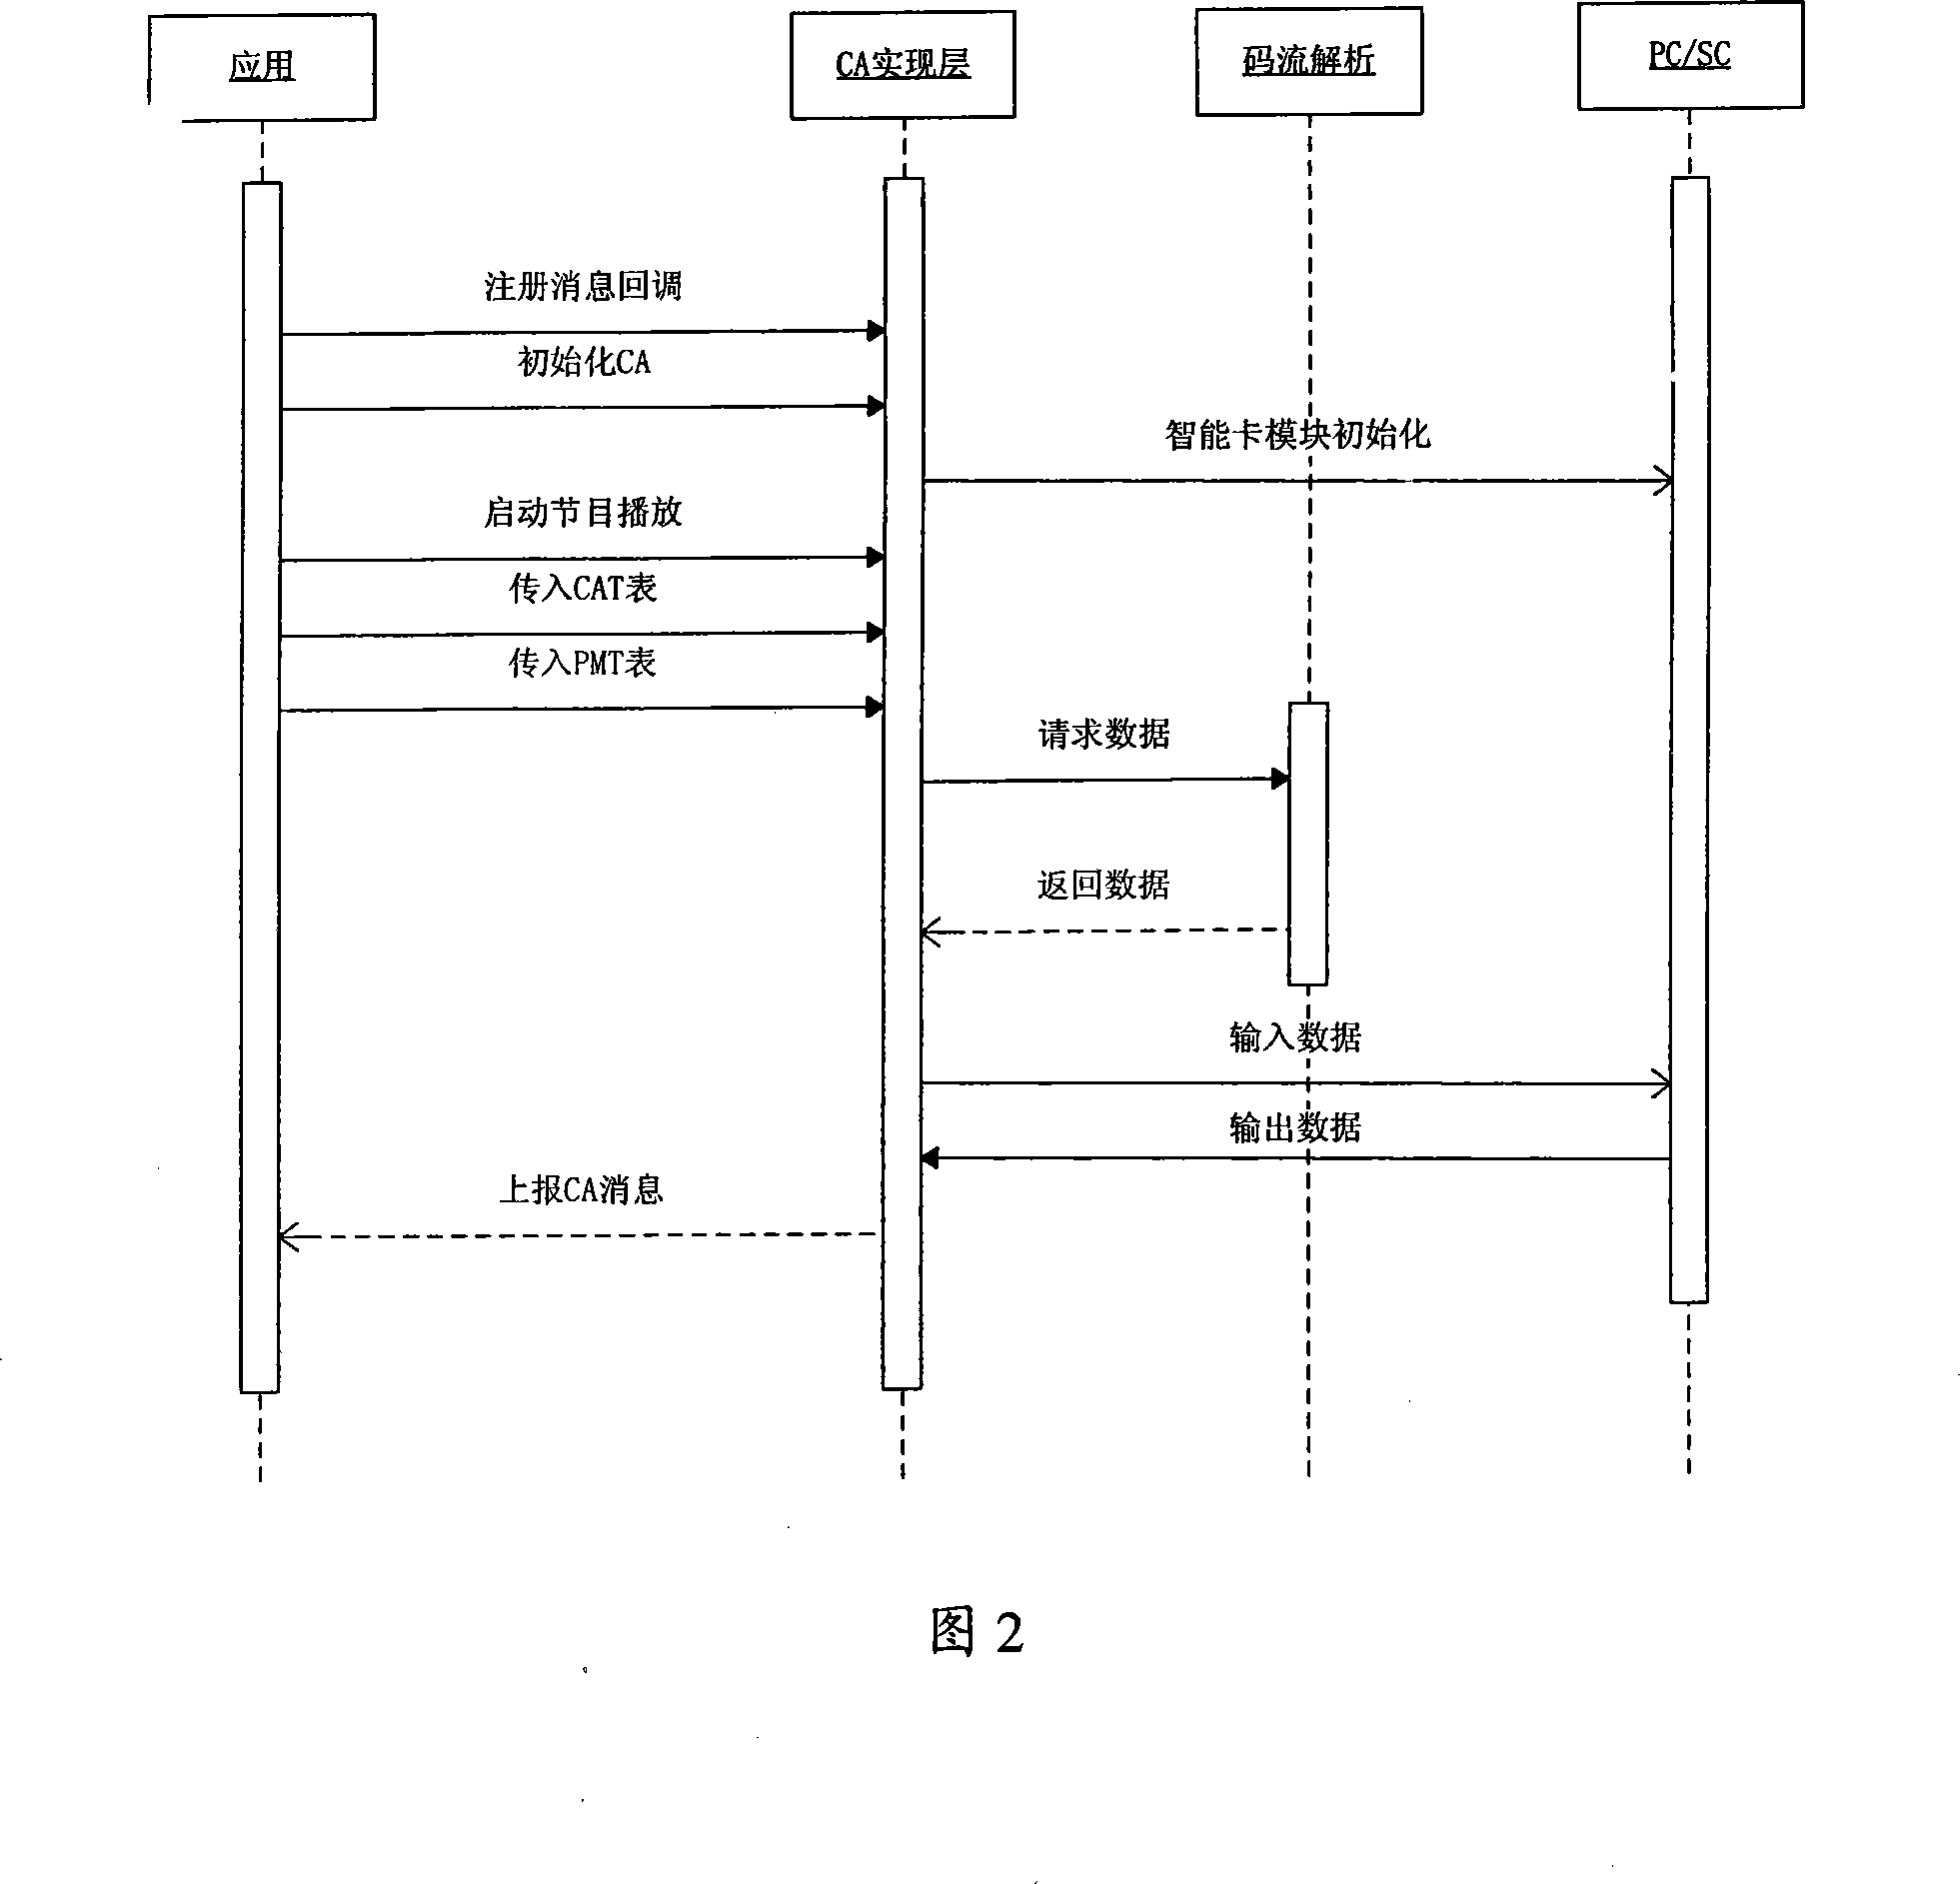 System and method for developing conditional access system under Window